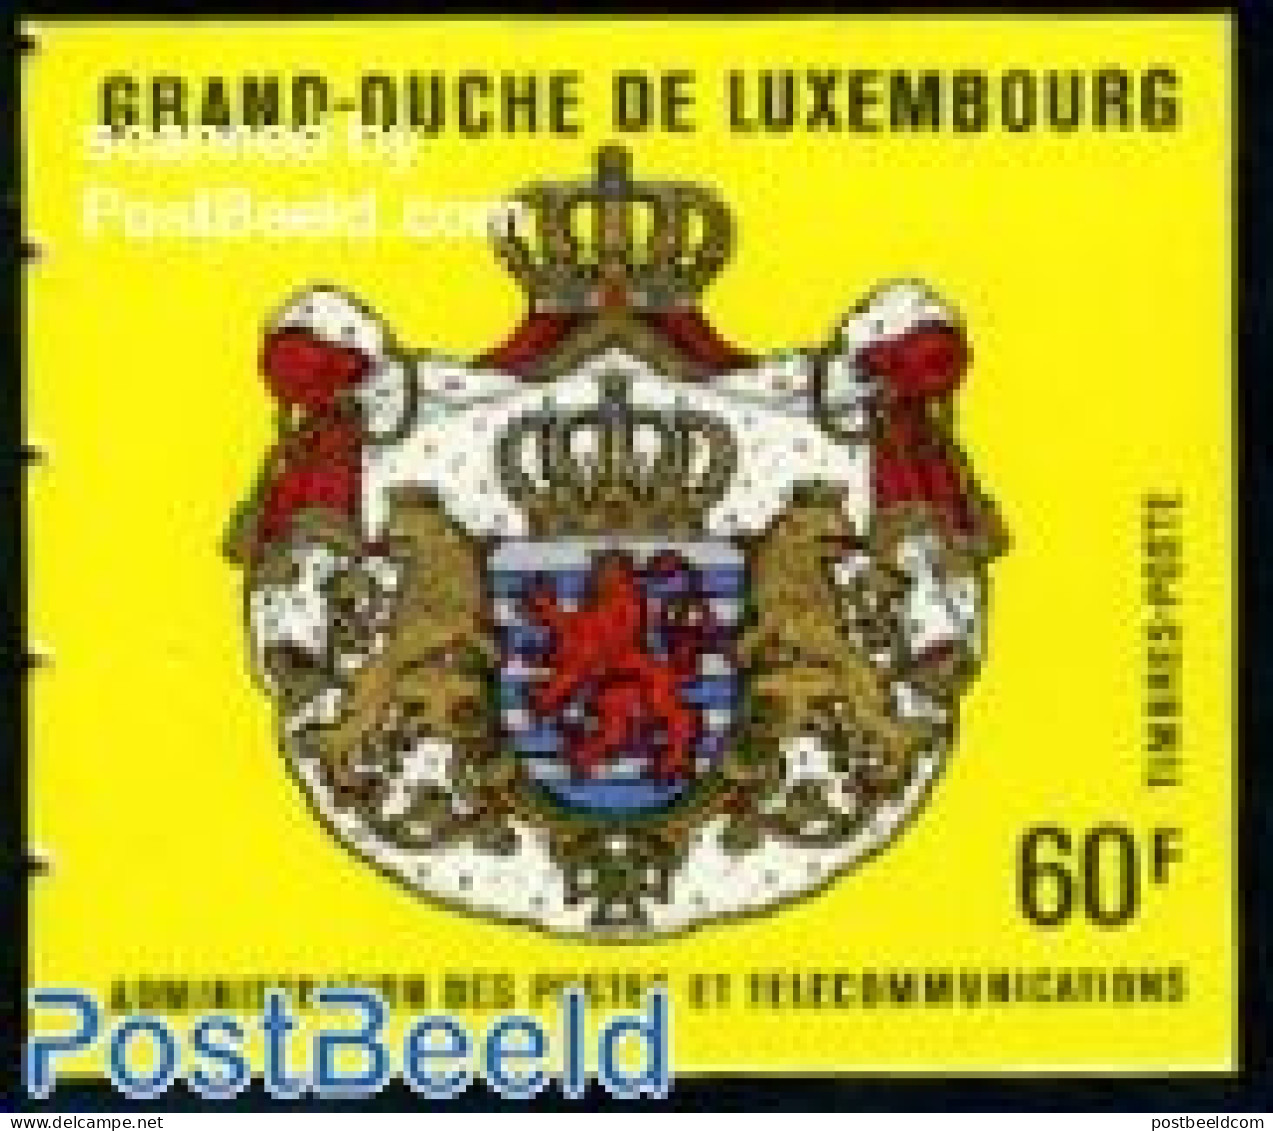 Luxemburg 1989 Silver Jubilee Booklet, Mint NH, History - Kings & Queens (Royalty) - Stamp Booklets - Neufs